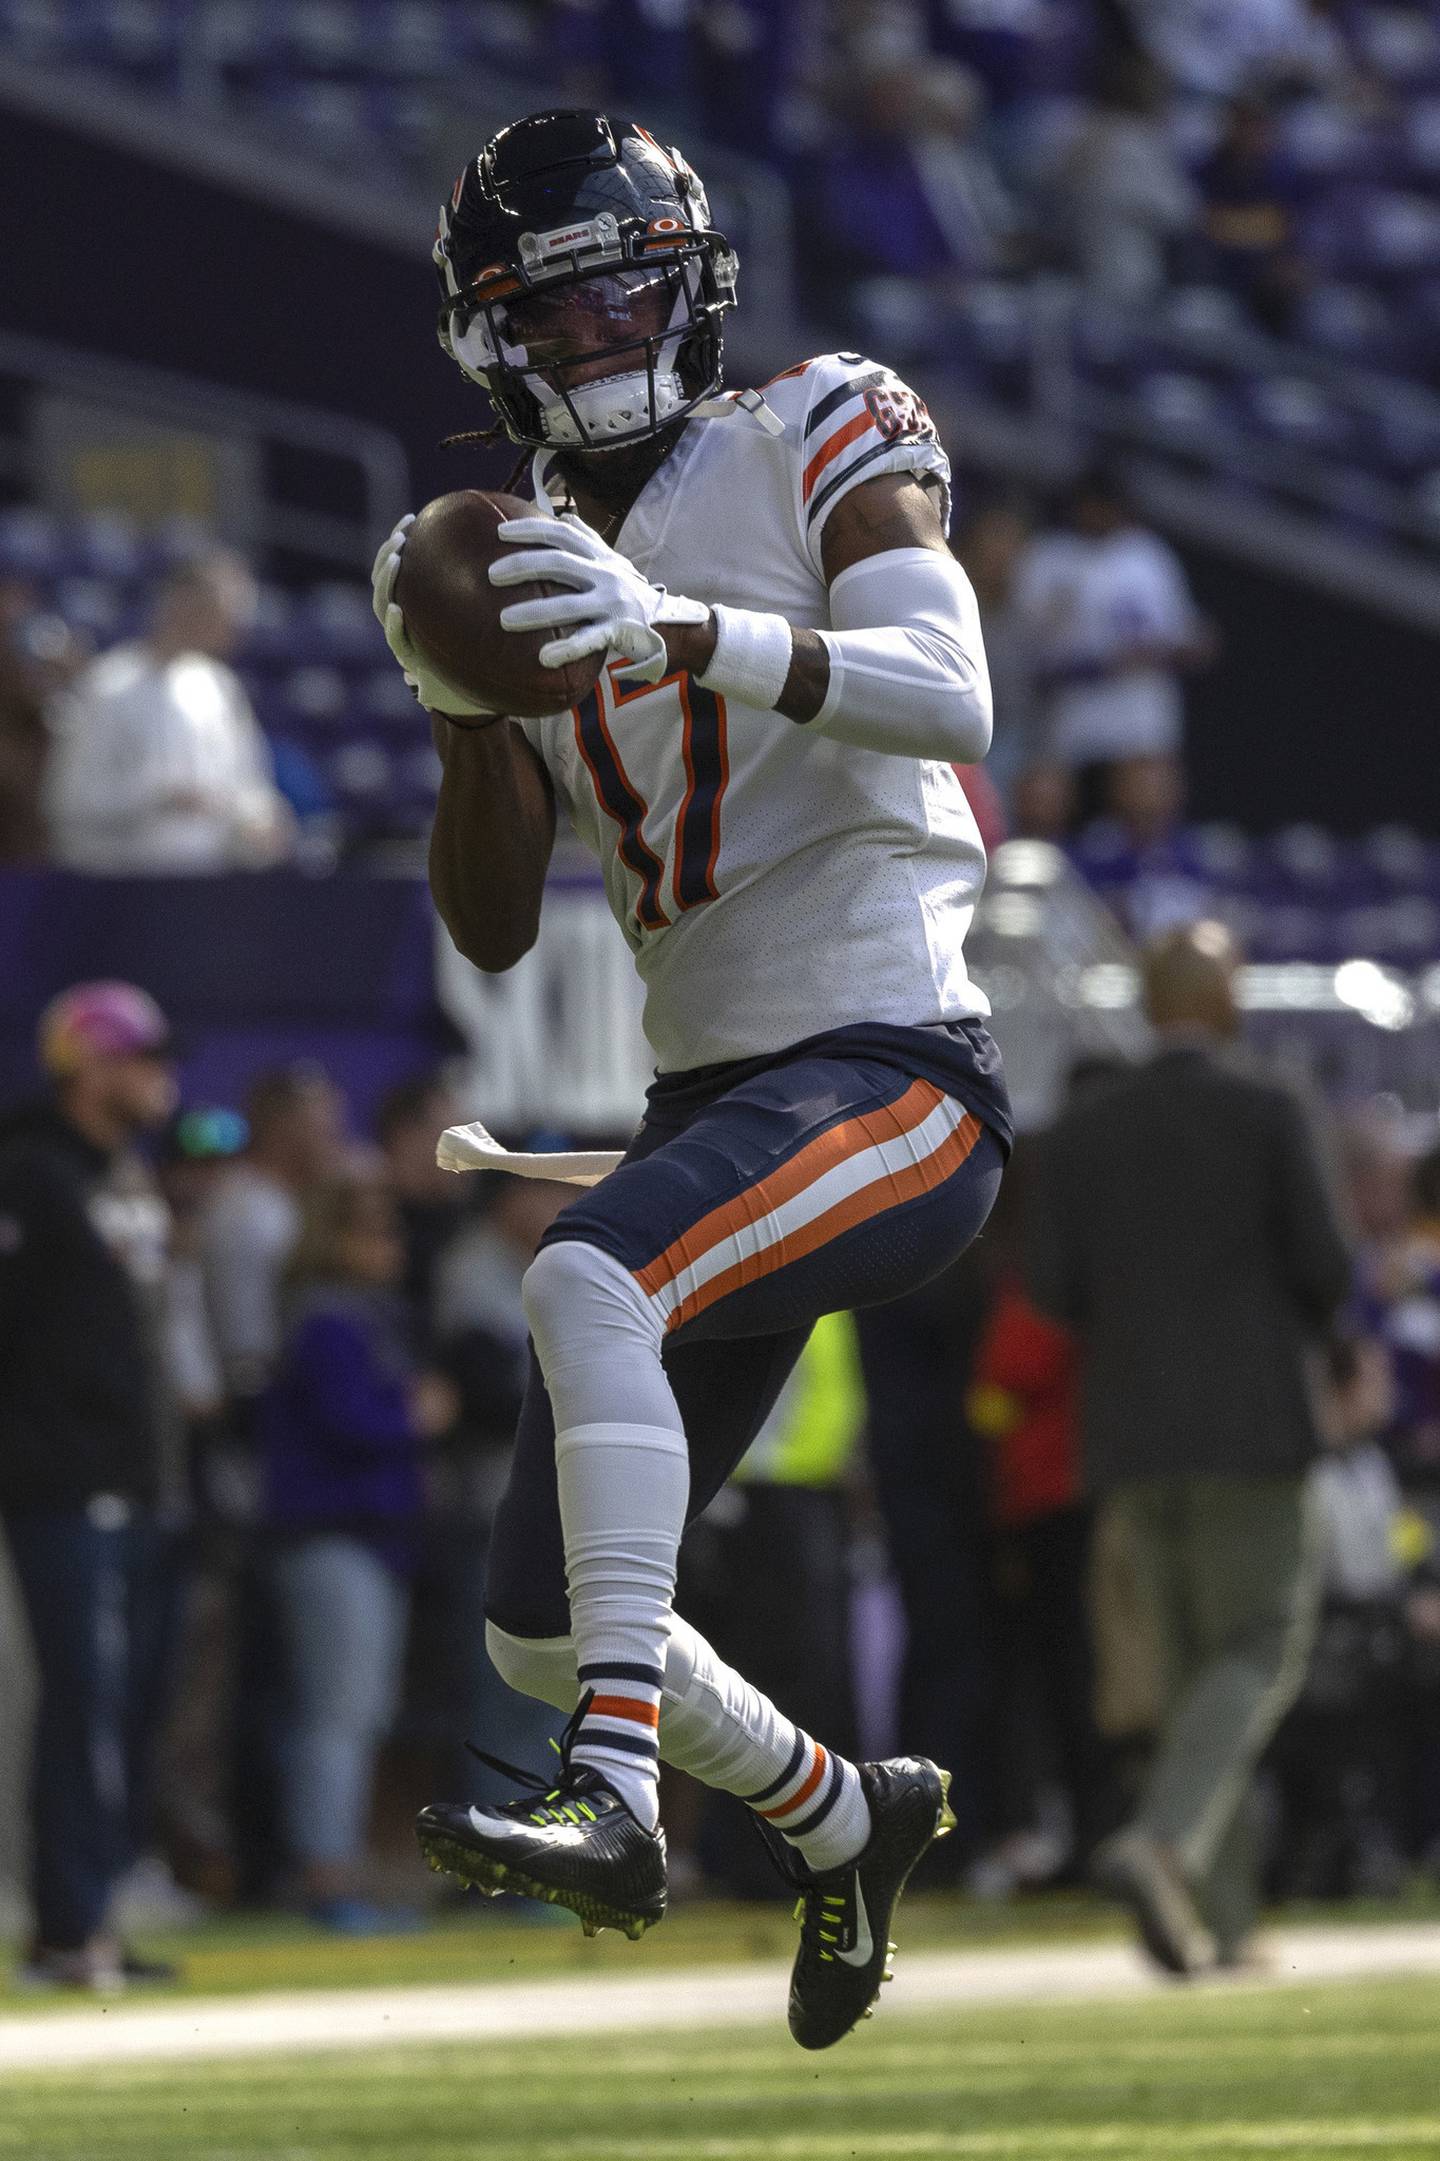 Bears wide receiver Ihmir Smith-Marsette warms up before the Week 5 game against the Vikings at U.S. Bank Stadium on Oct. 9, 2022.